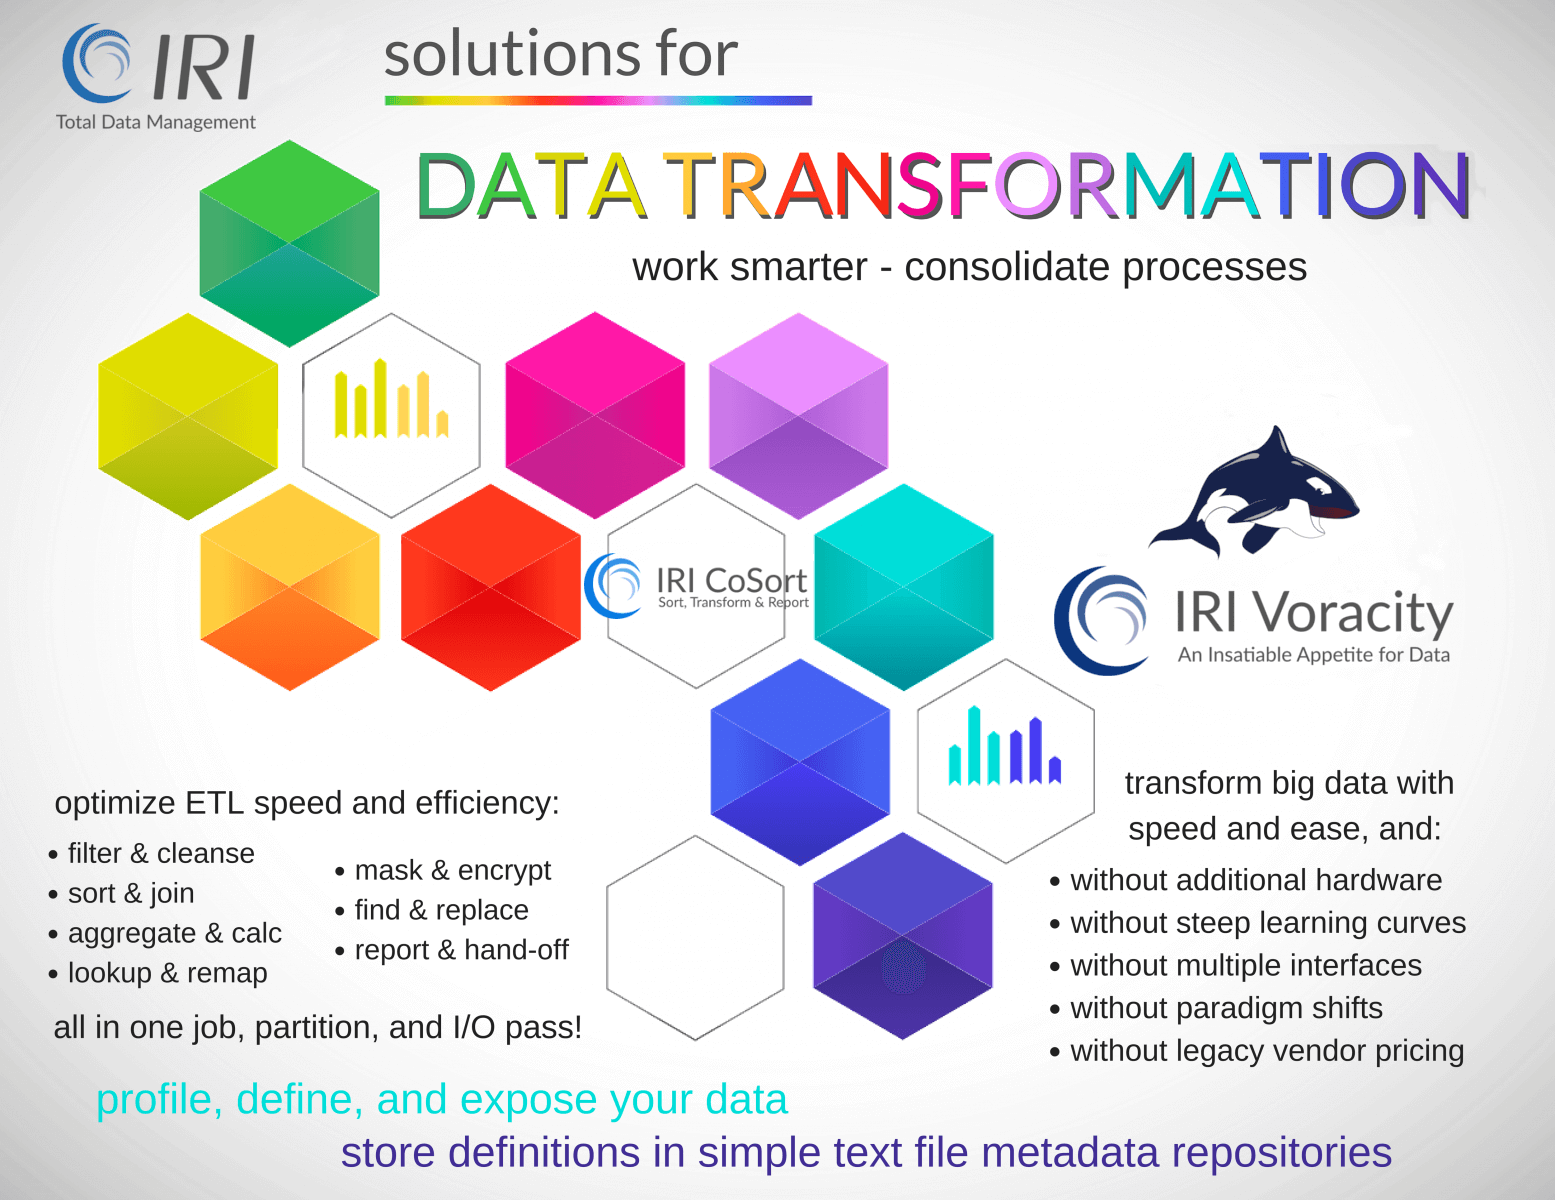 IRI solutions for data transformation problems to maximize the value of data